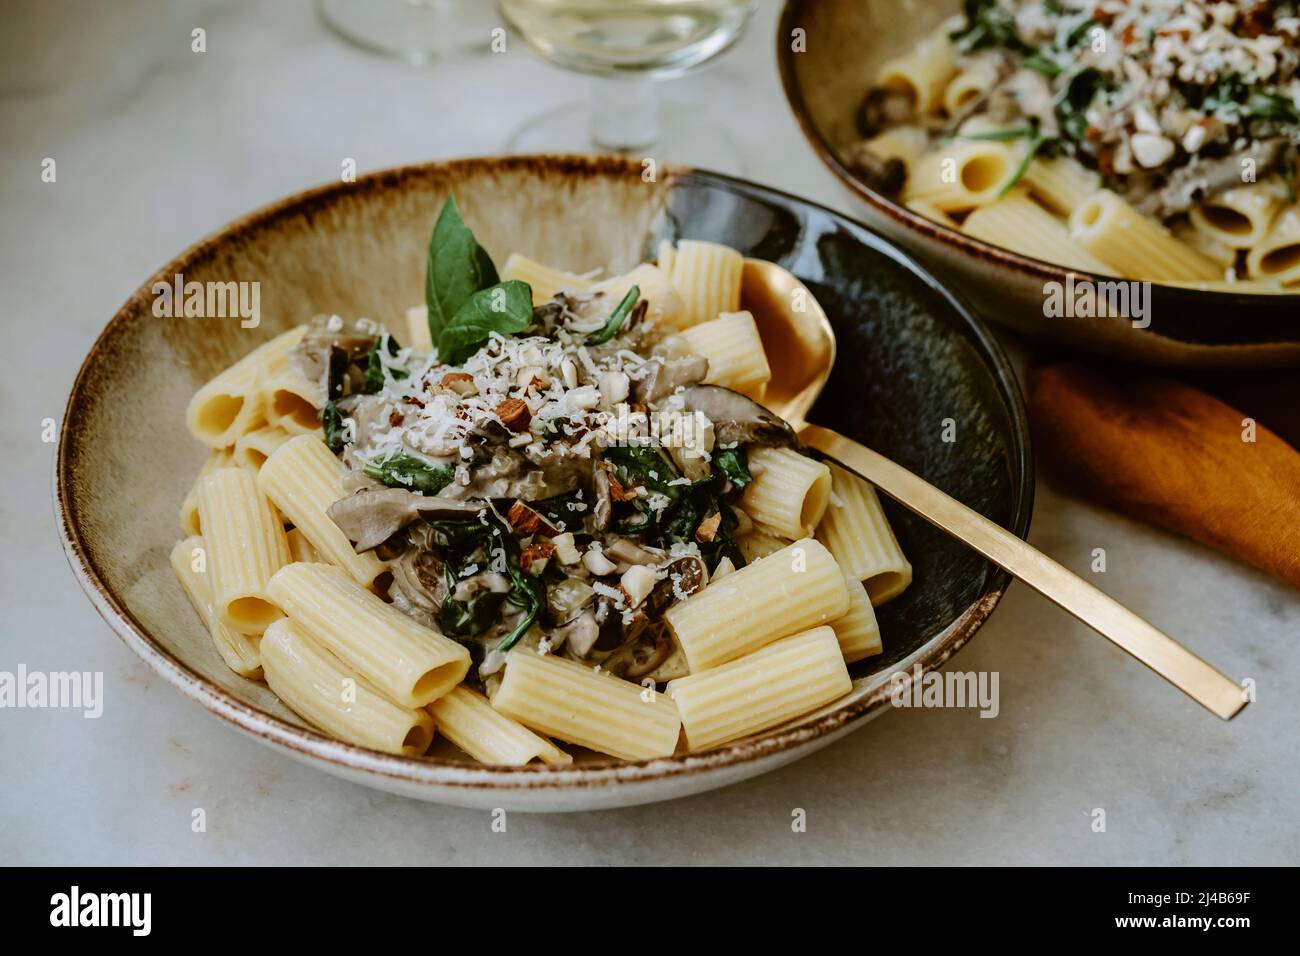 Rigatoni pasta dish, with cream, mushroom, spinach, almond and grated parmesan, in handmade plates, and glass of white wine, on a marble table Stock Photo